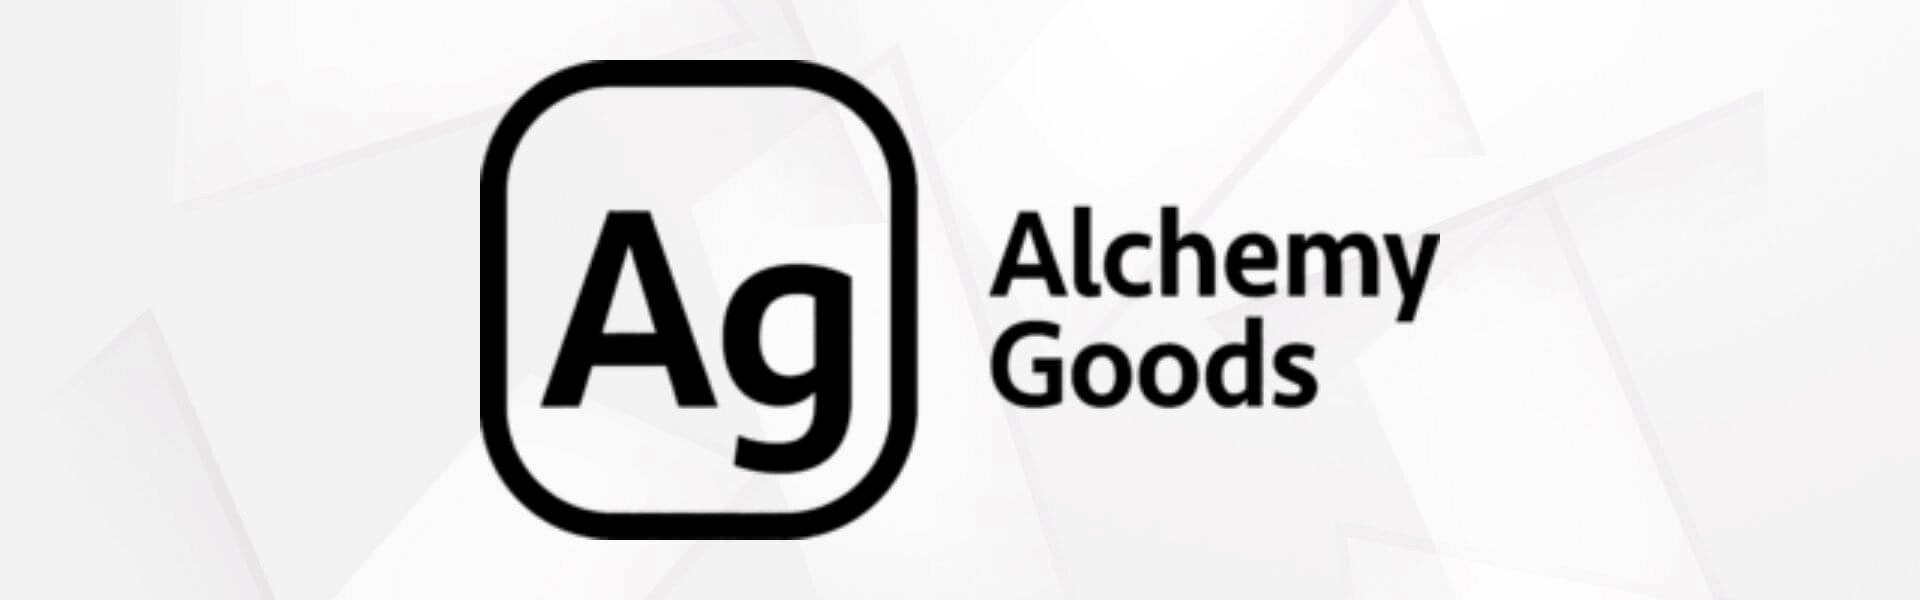 Alchemy Goods - Bags & Accessories